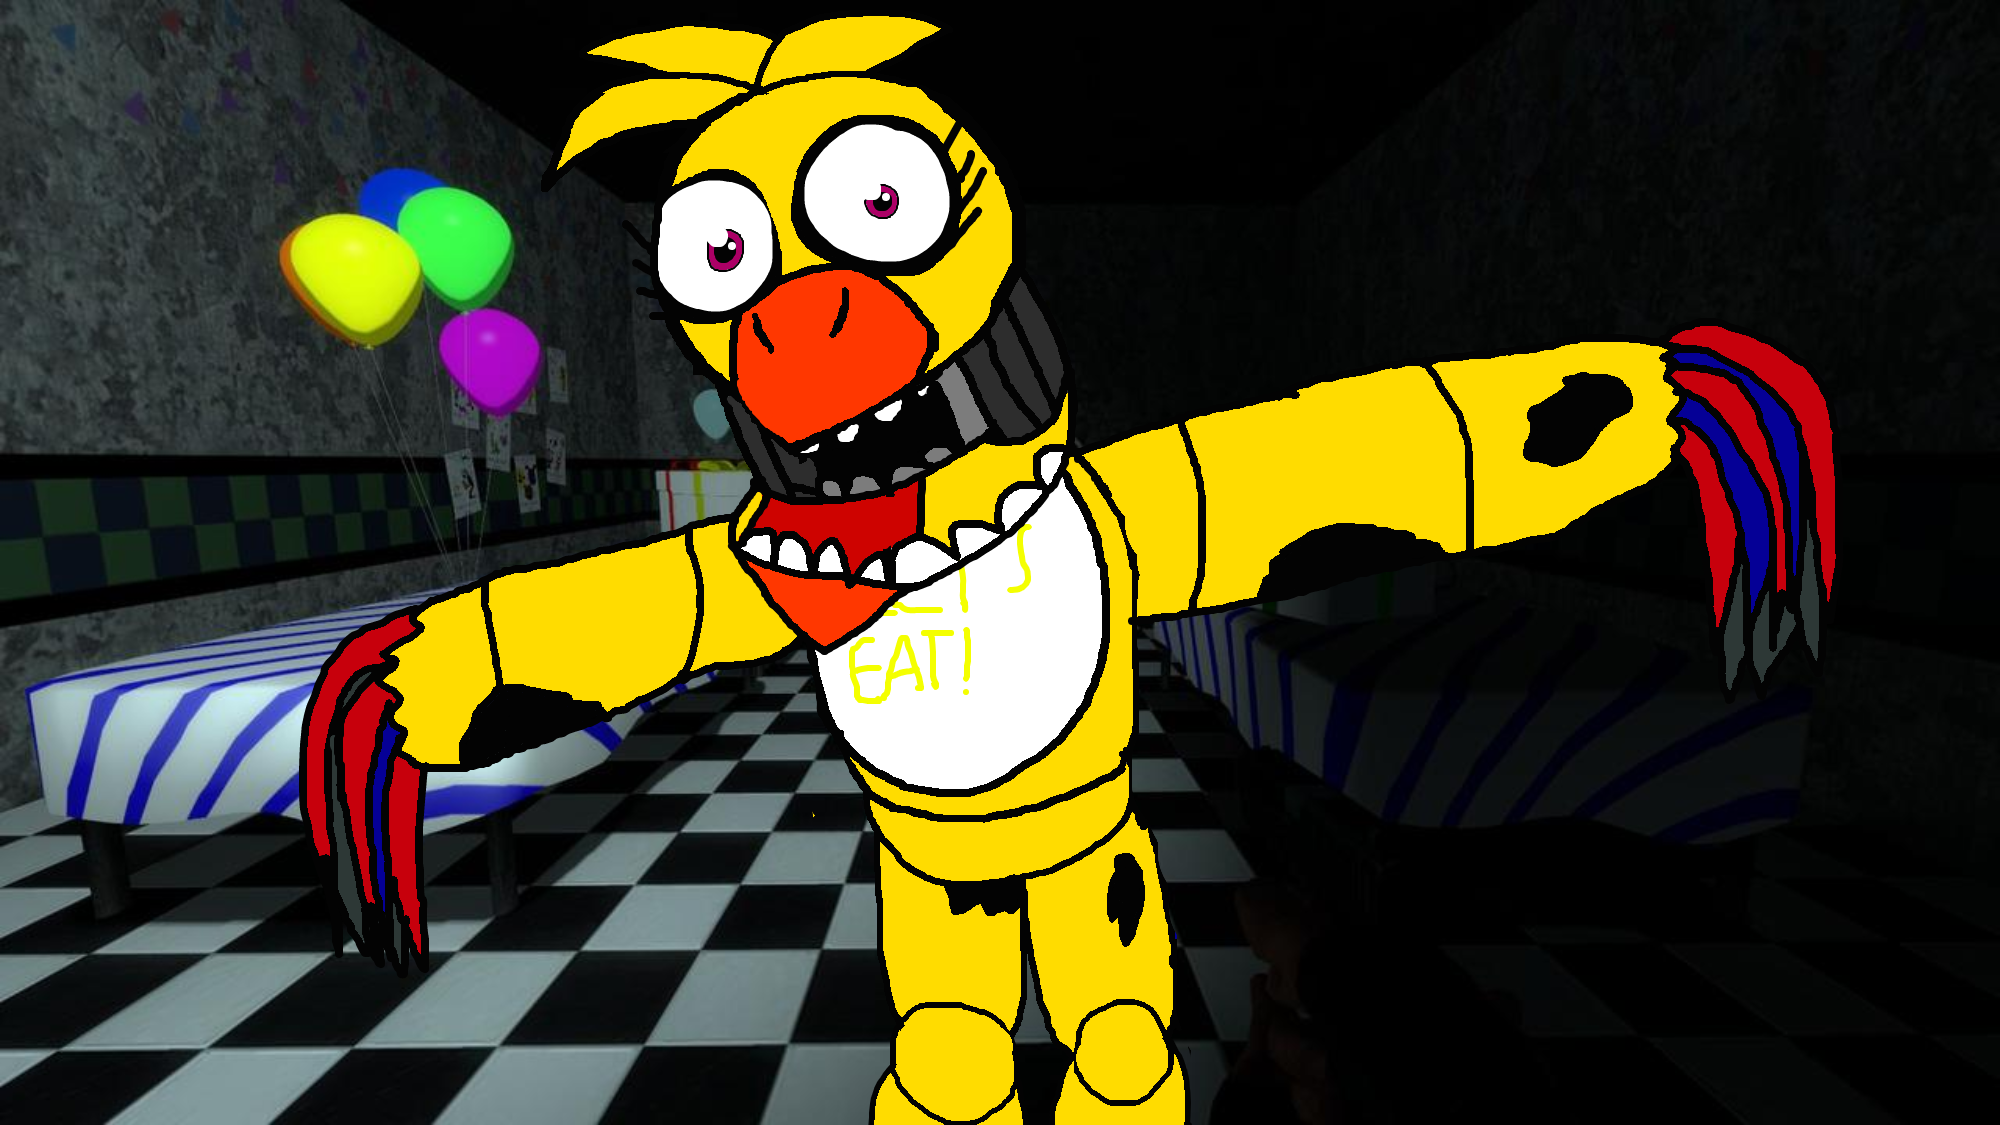 Chibi Withered Chica by XPurplePieX on DeviantArt